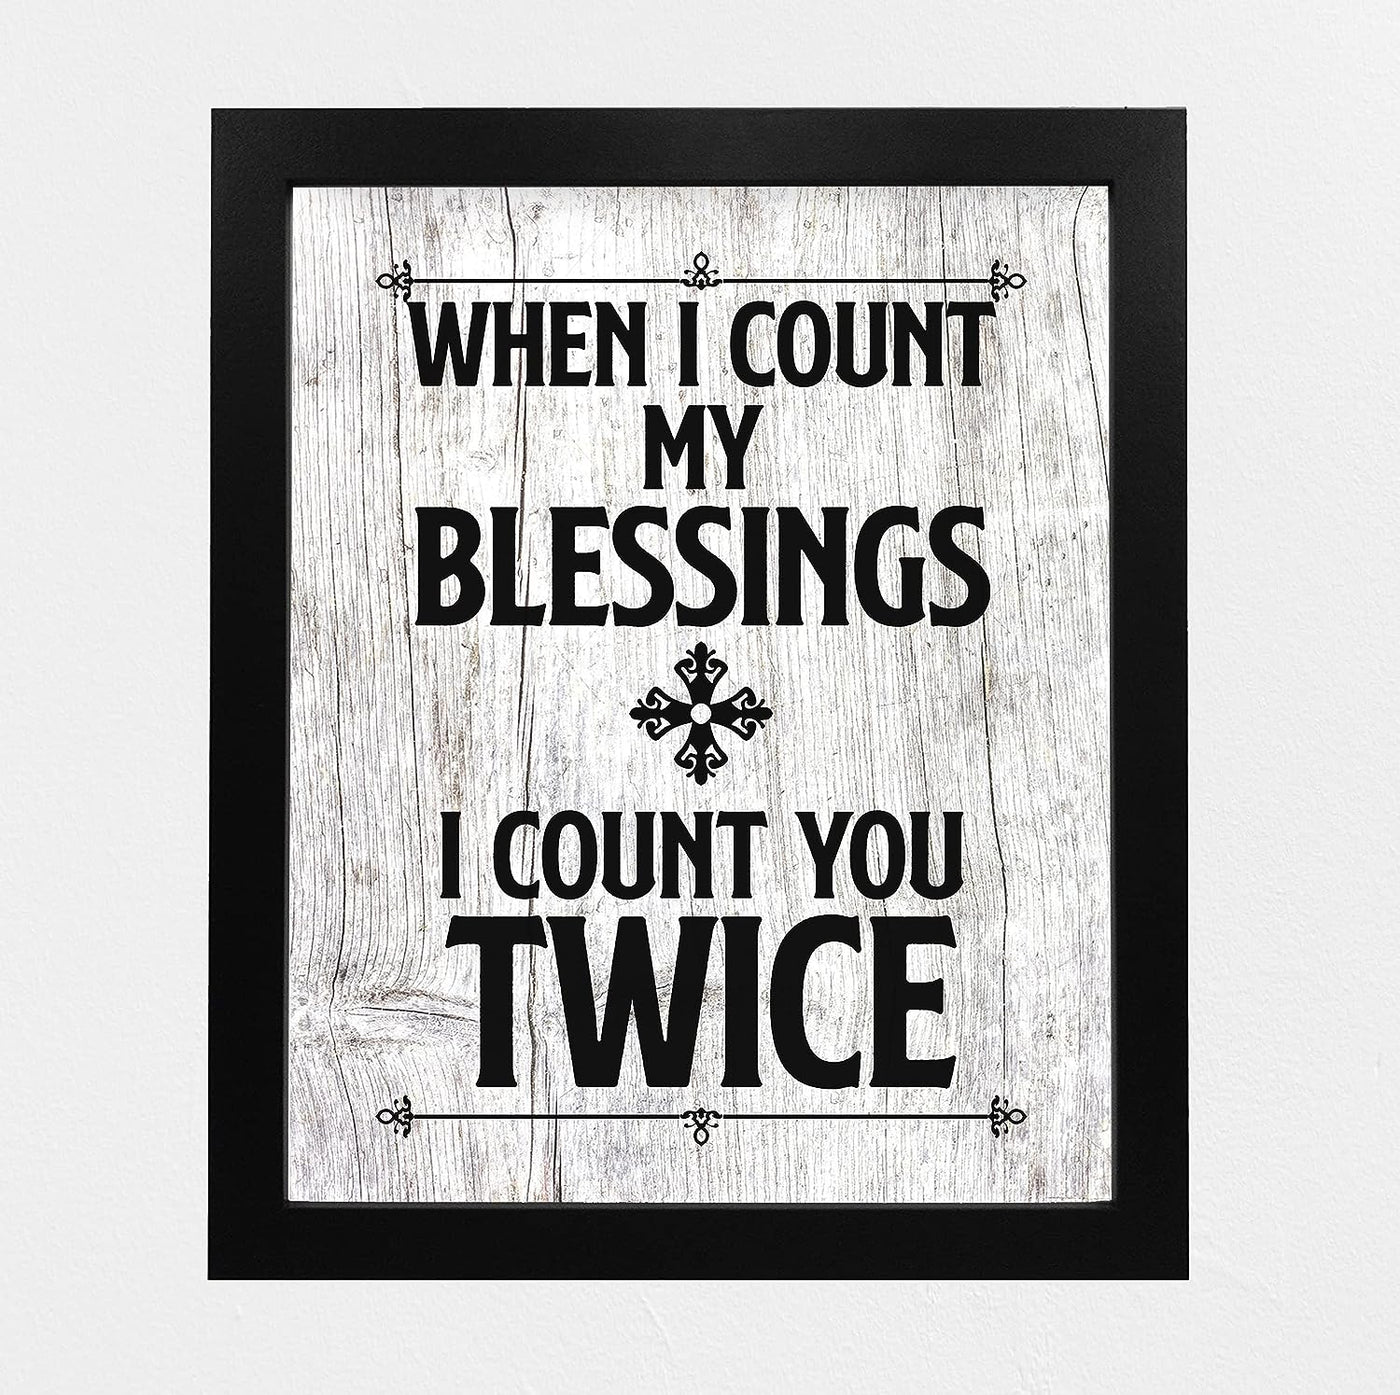 When I Count My Blessings-Count You Twice Inspirational Quotes Wall Art -8x10" Rustic Love Print-Ready to Frame. Romantic Home-Bedroom-Wedding Decor. Great Gift for Couples! Printed on Photo Paper.